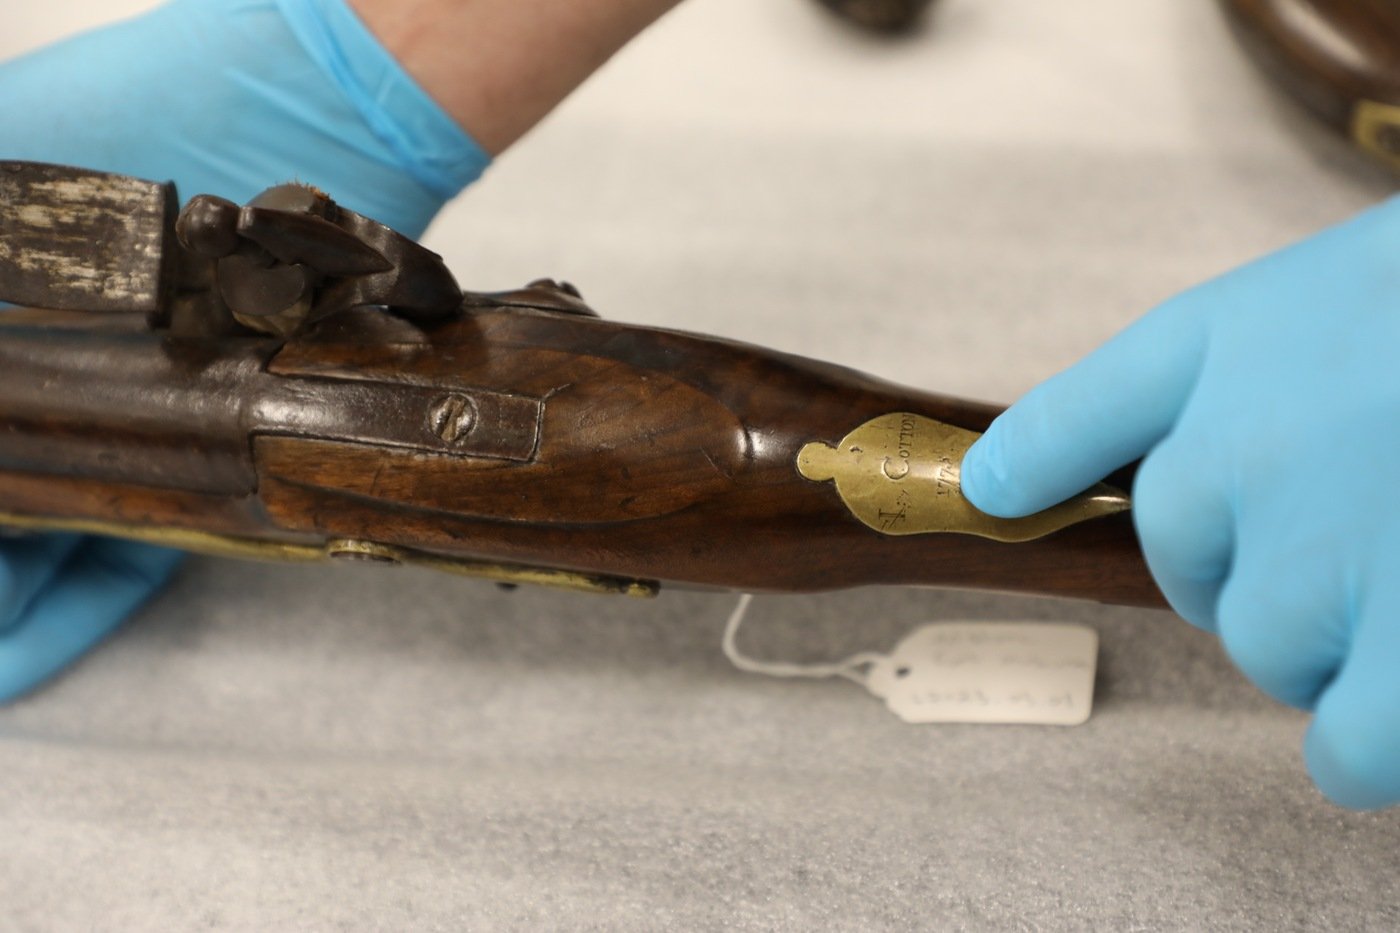 A Museum of the American Revolution employee points out a detail of the brass inlay of a Revolutionary War-era musket that was recovered as part of a joint art crime investigation by FBI Philadelphia and our law enforcement partners, with significant assistance from the U.S. Attorney's Office for the Eastern District of Pennsylvania and the Museum of the American Revolution. A Massachusetts gunsmith manufactured the musket in 1775, and it was likely used in the earliest battles of the Revolutionary War.